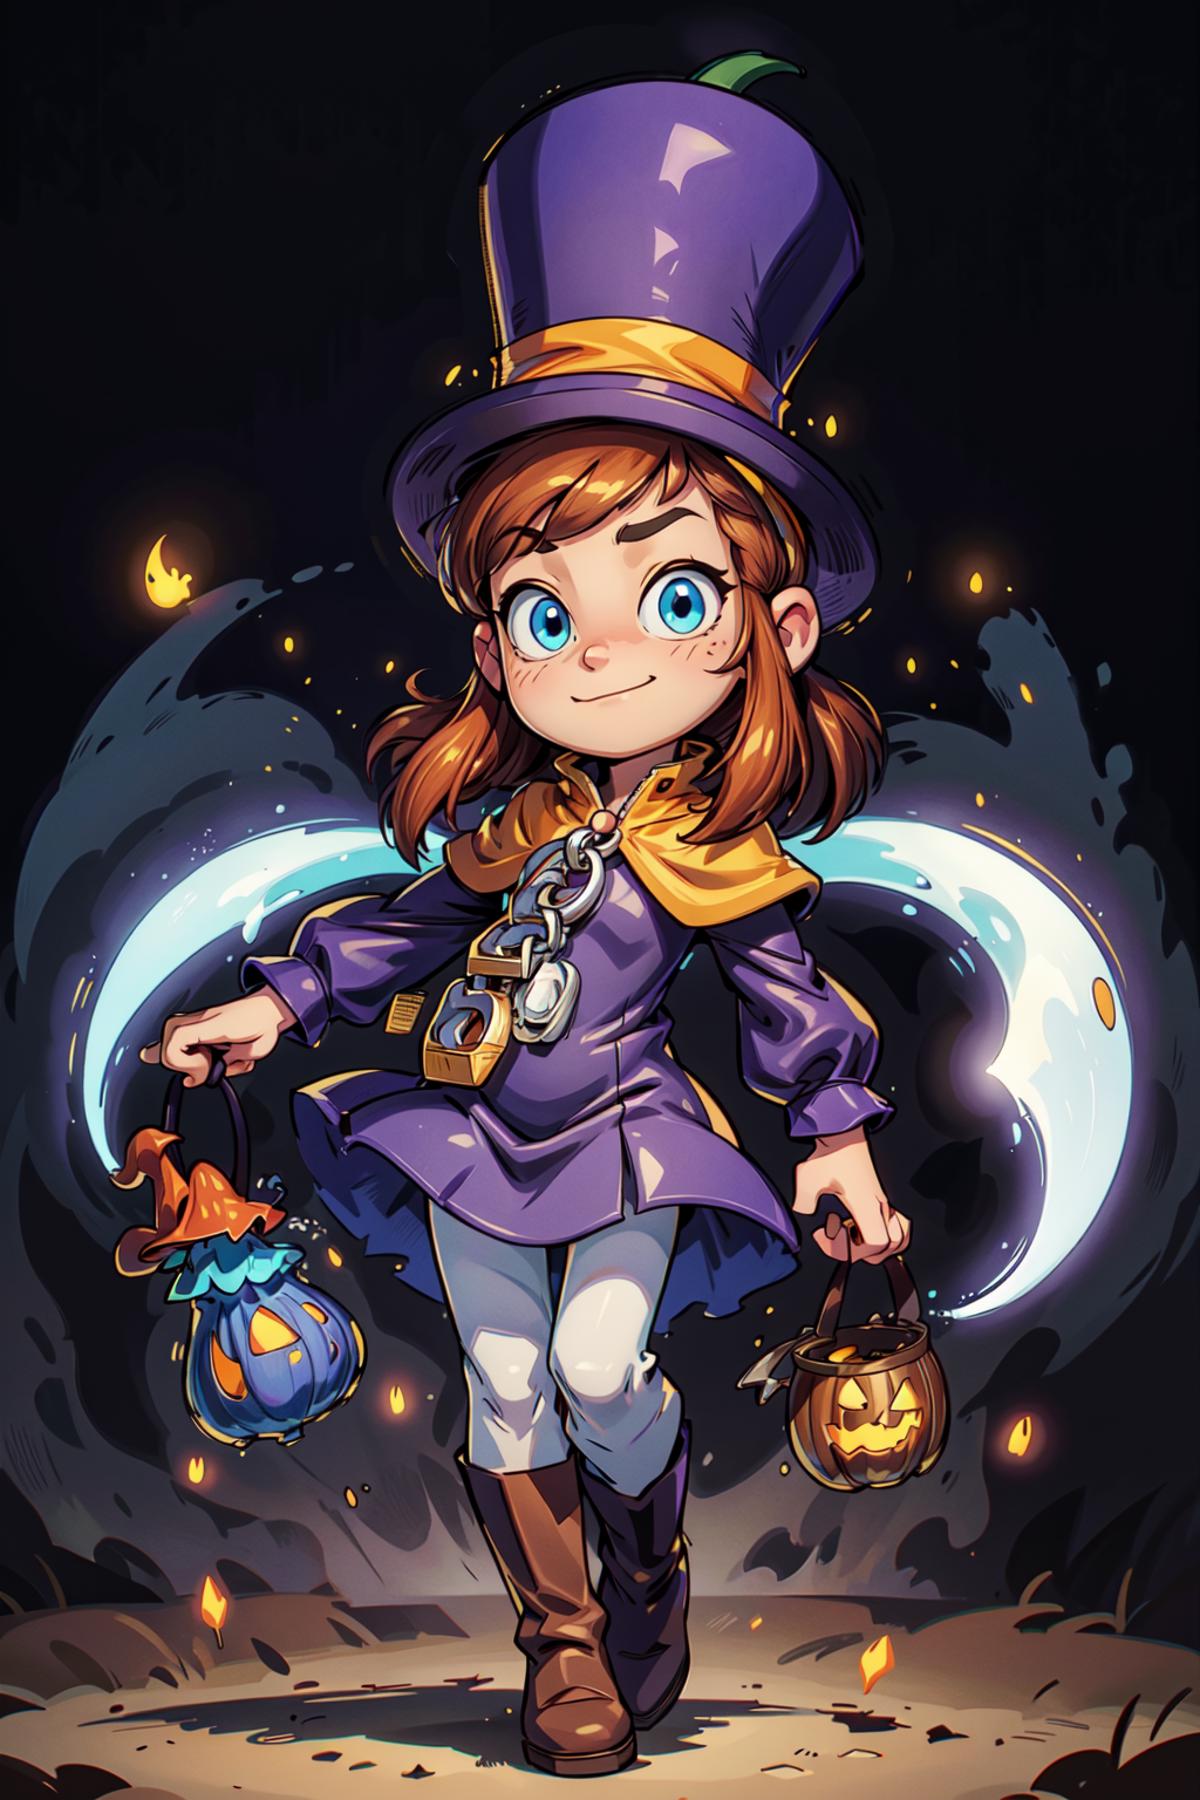 A Hat In Time - Hat Kid image by Kayako